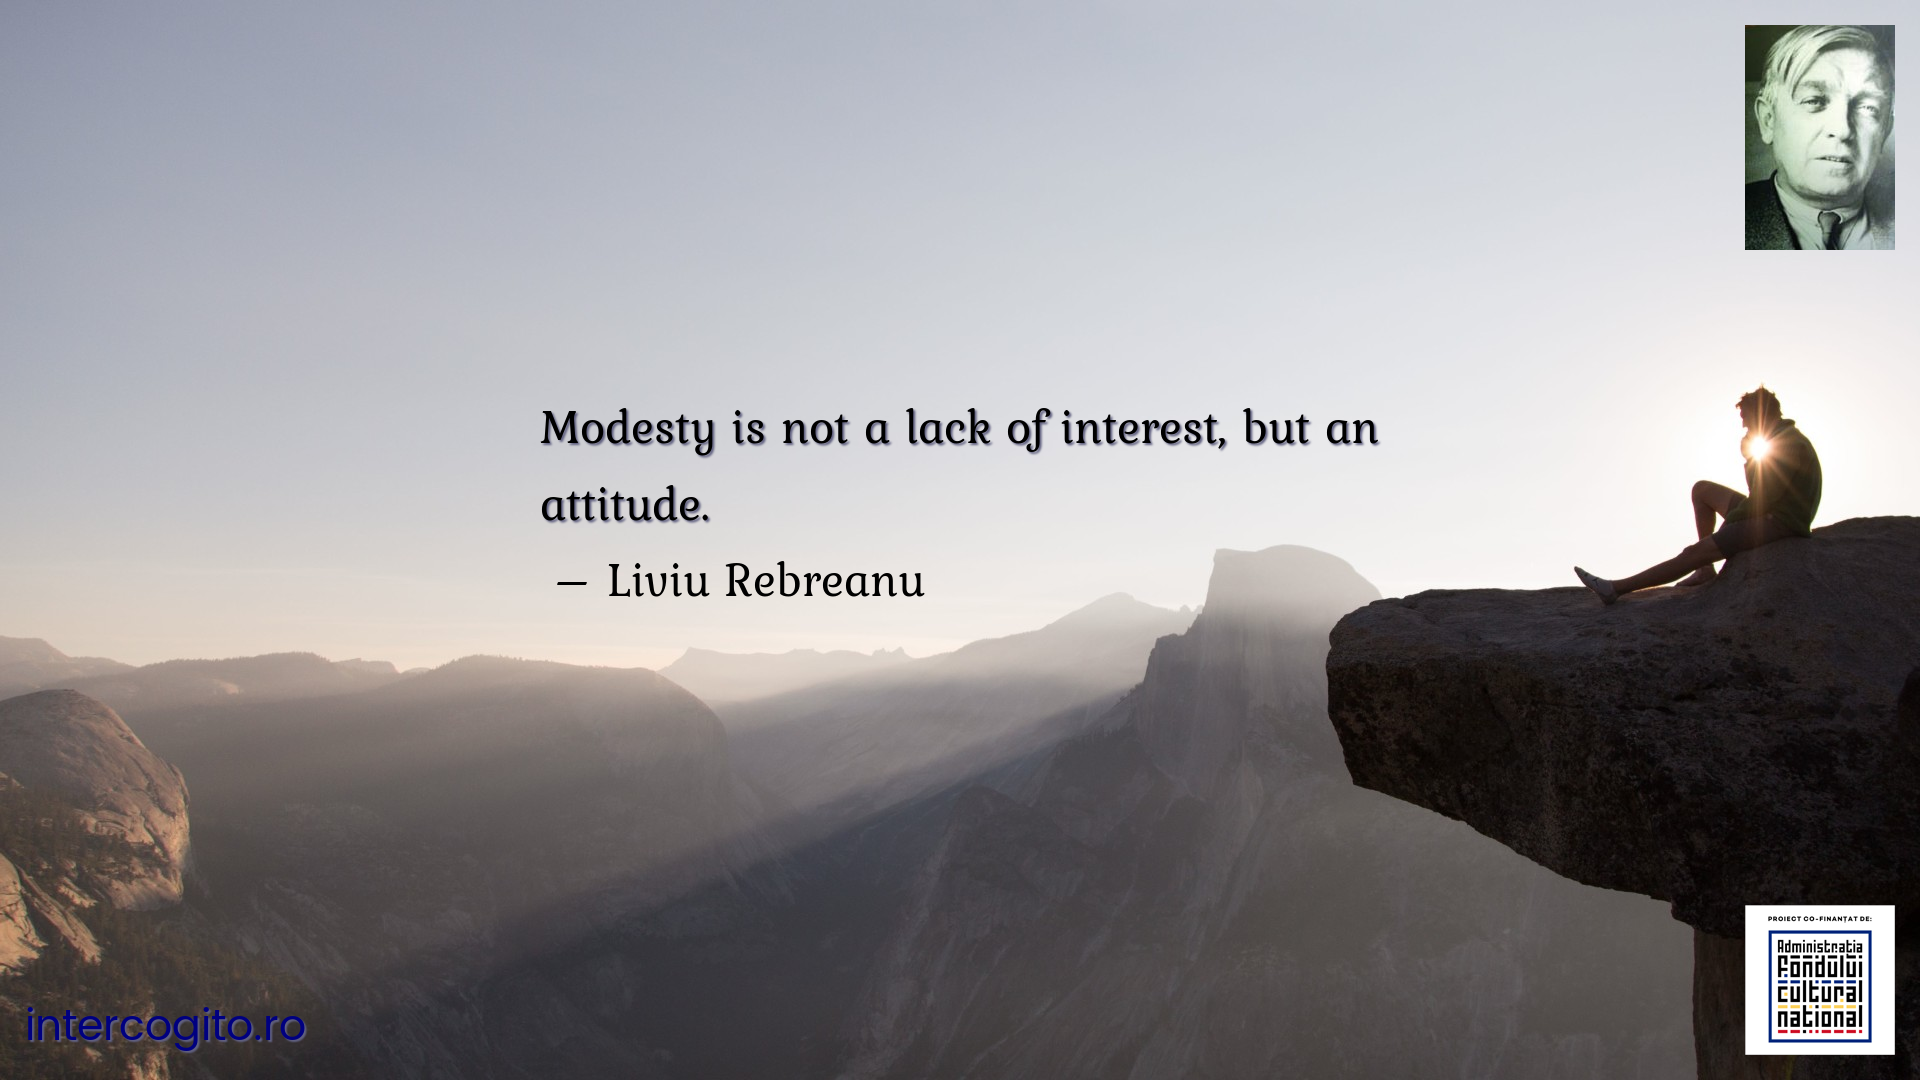 Modesty is not a lack of interest, but an attitude.